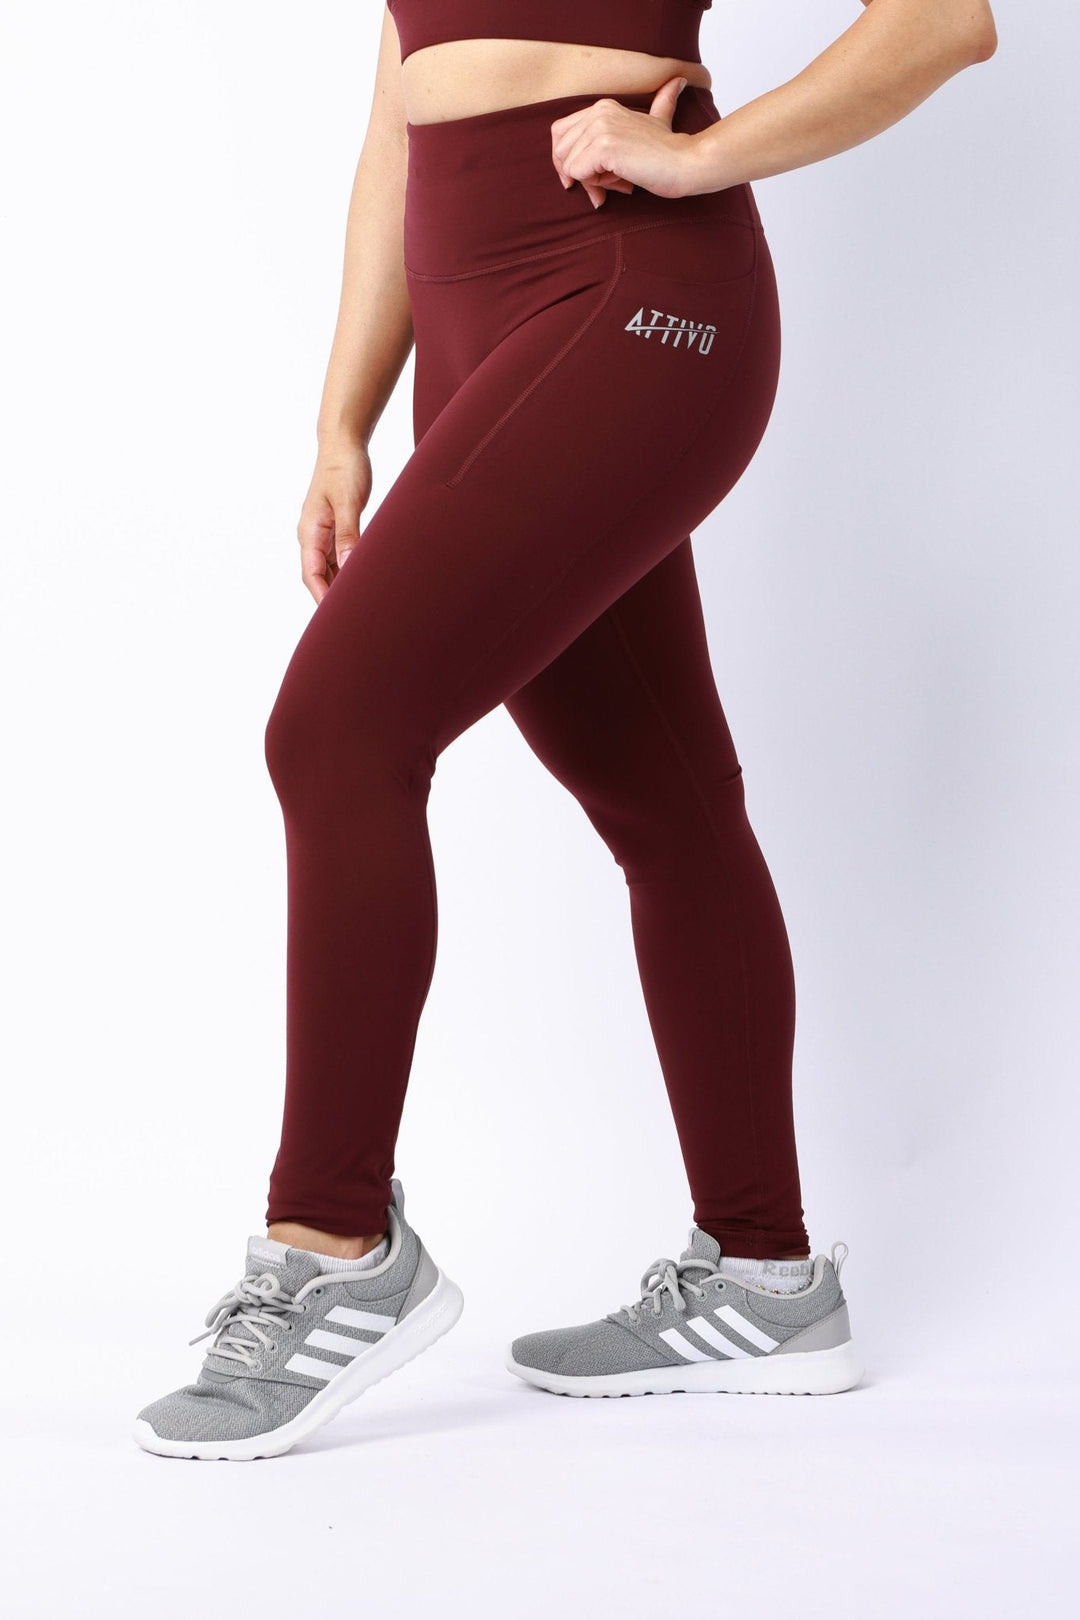 Athletic Women's Leggings With Pockets In Wine Tasting - attivousa Free Shipping over $75 Womens Activewear Attivo